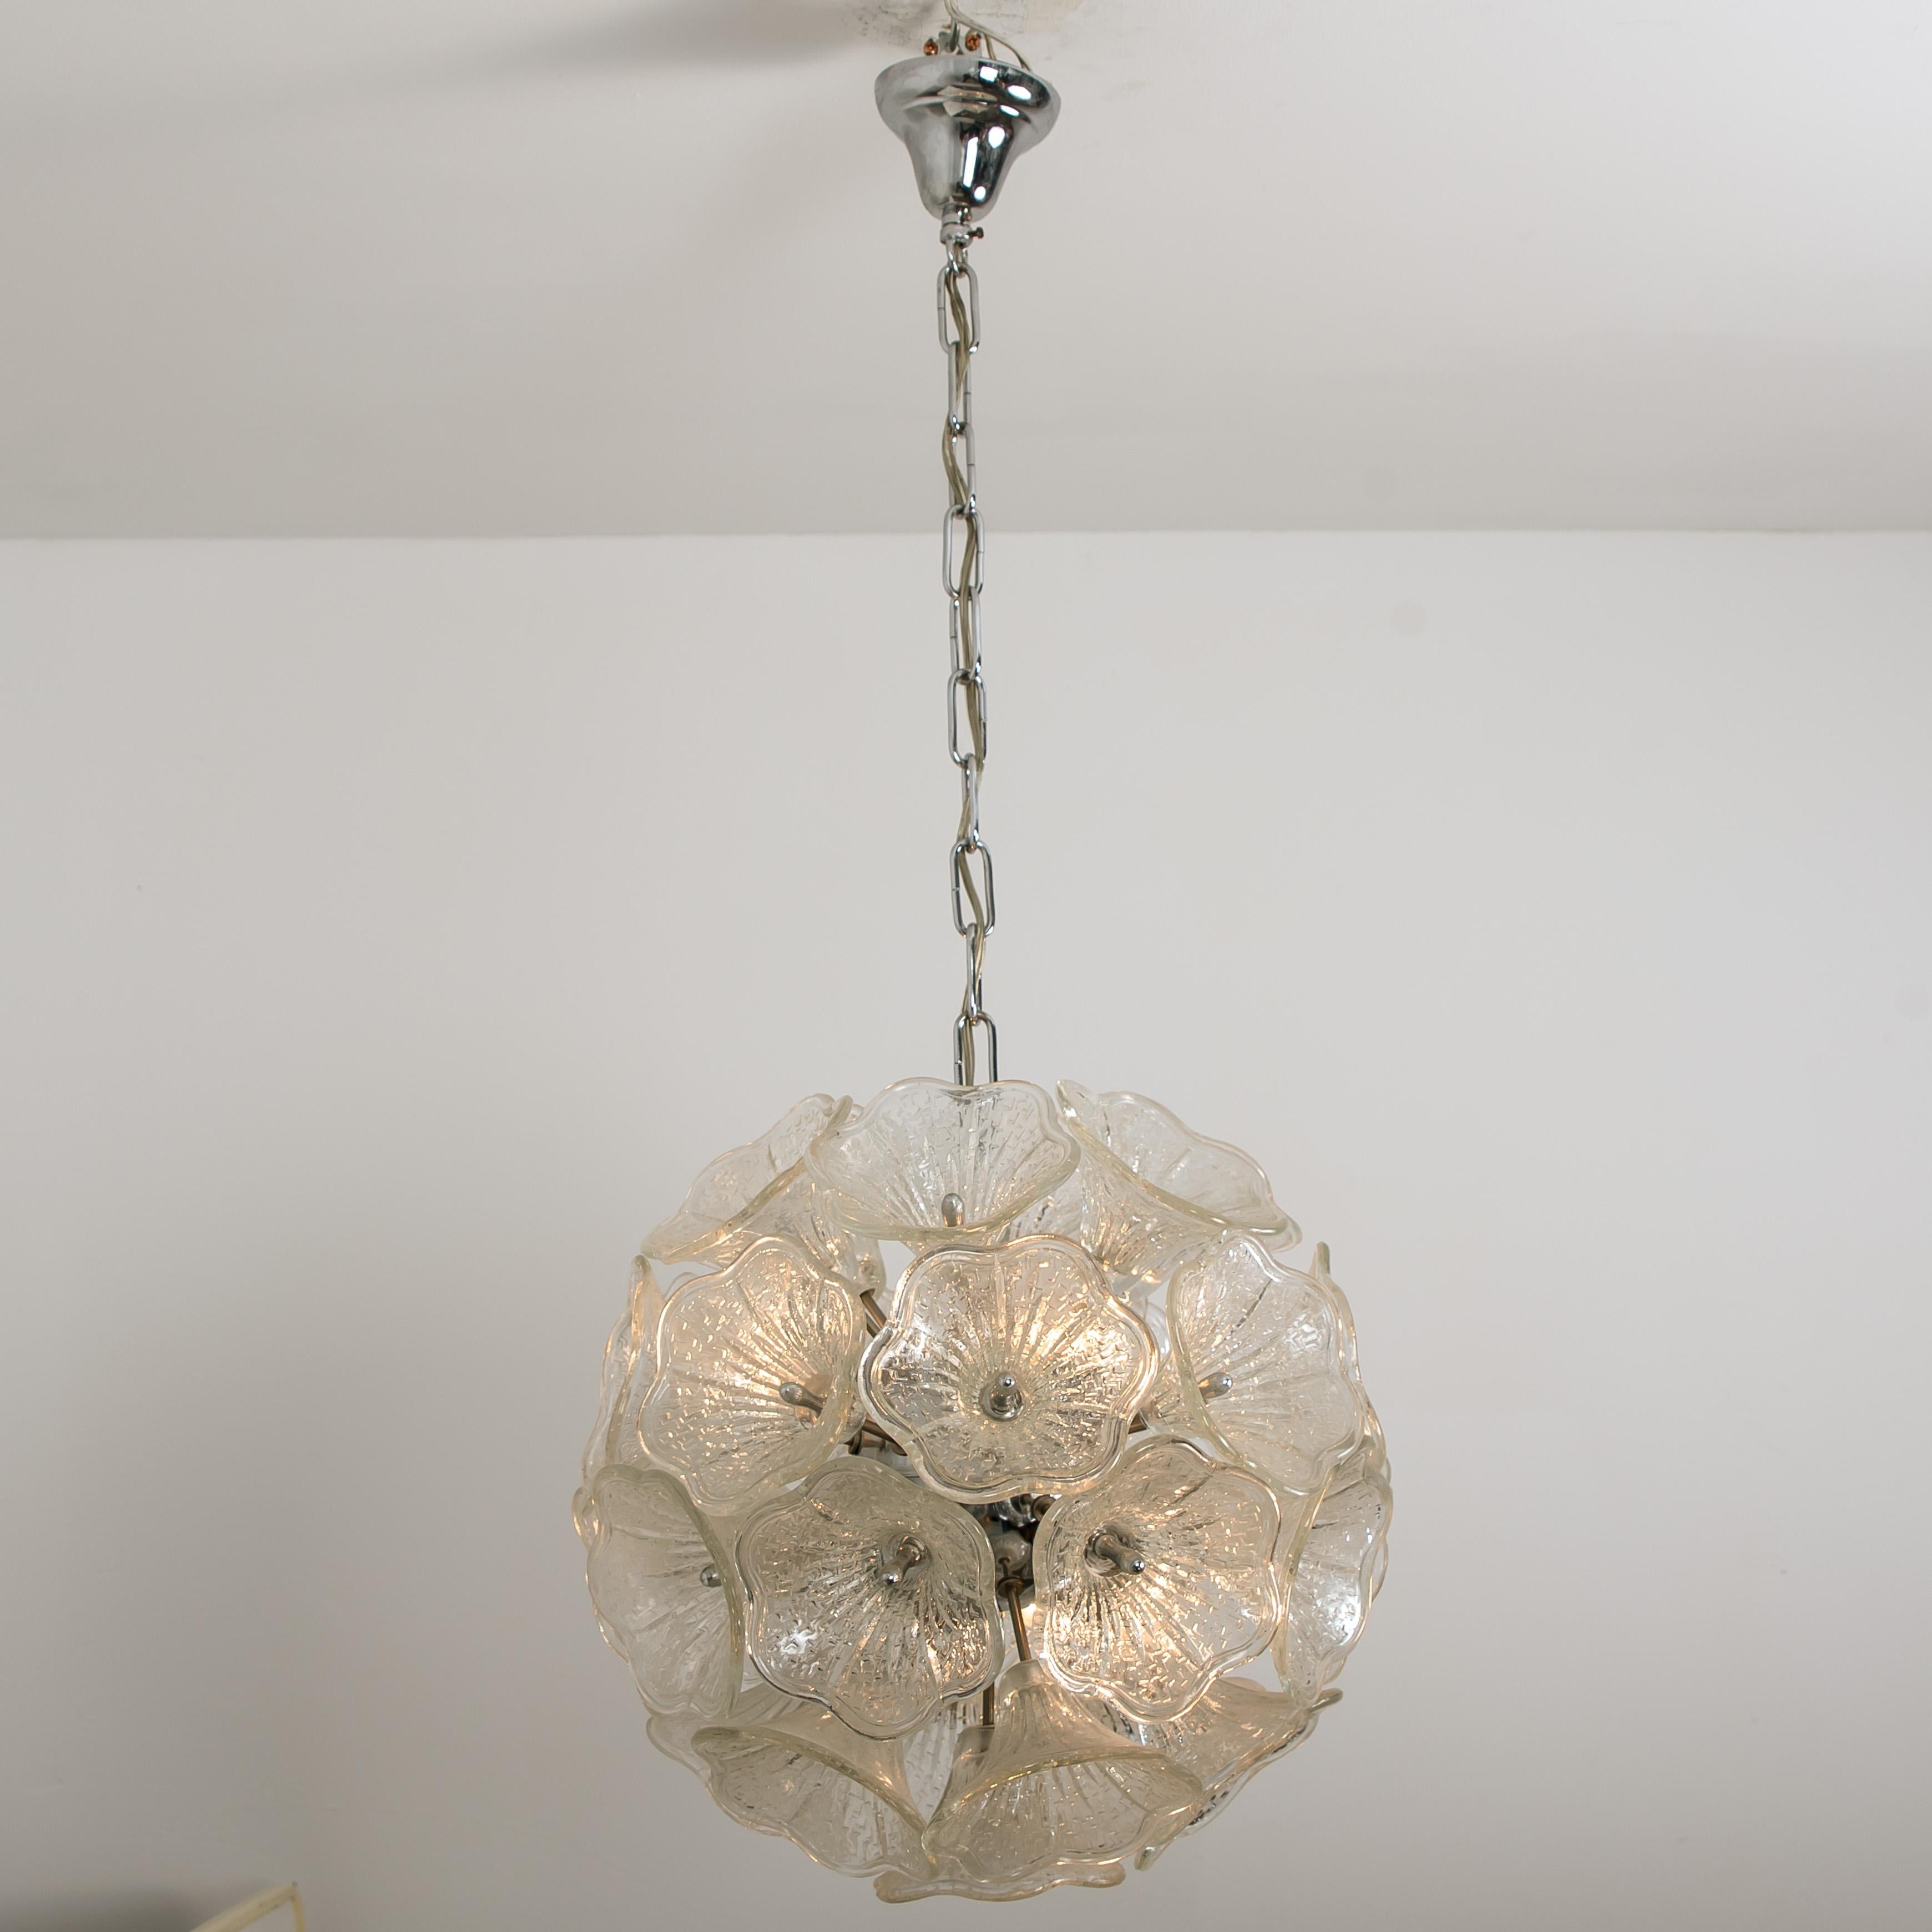 Sputnik Murano Glass and Chrome Chandelier in the Style of Venini, 1960s For Sale 2